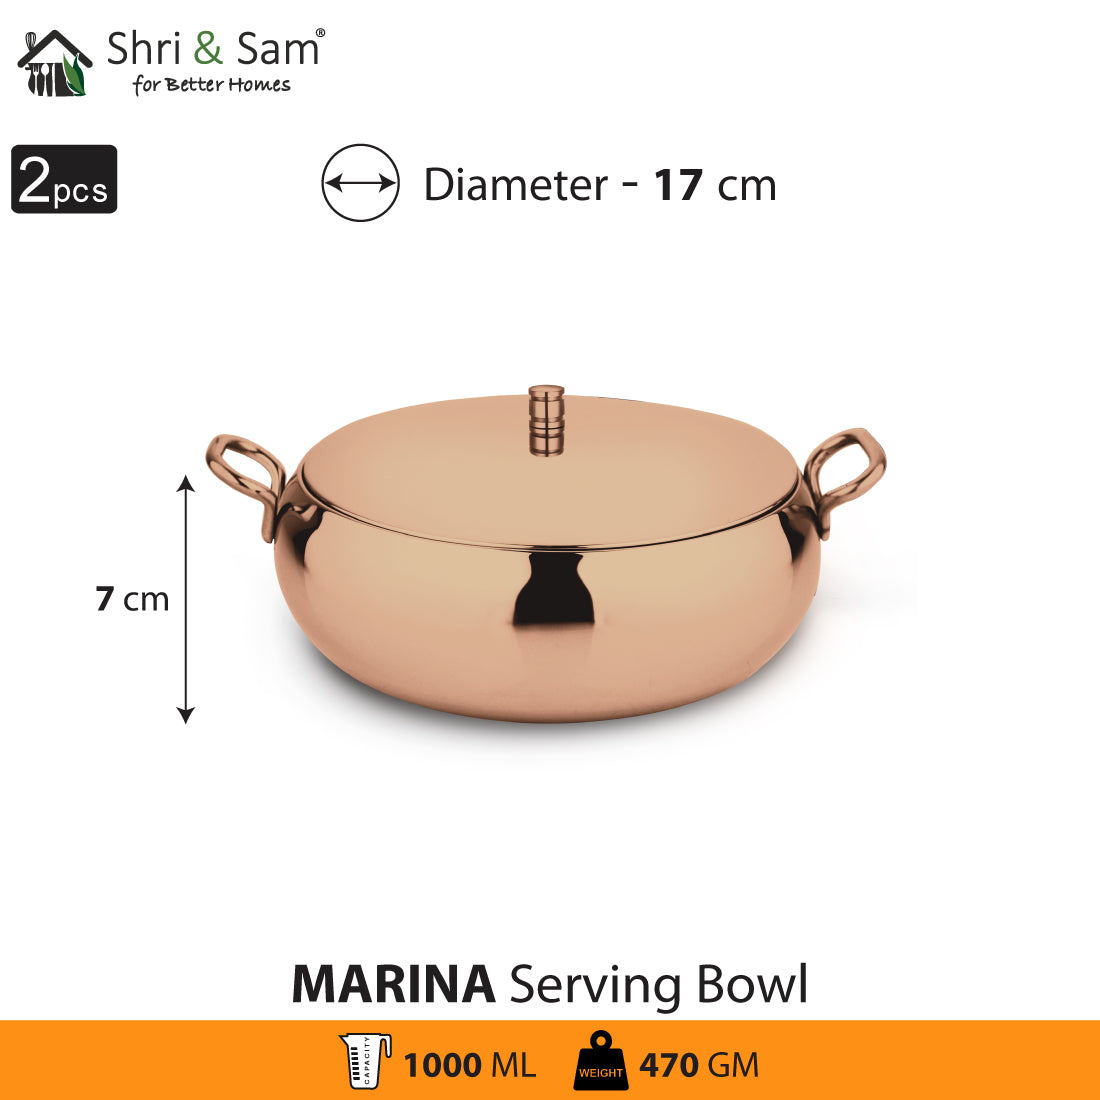 Stainless Steel 2 PCS Serving Bowl and Lid with Rose Gold PVD Coating Marina